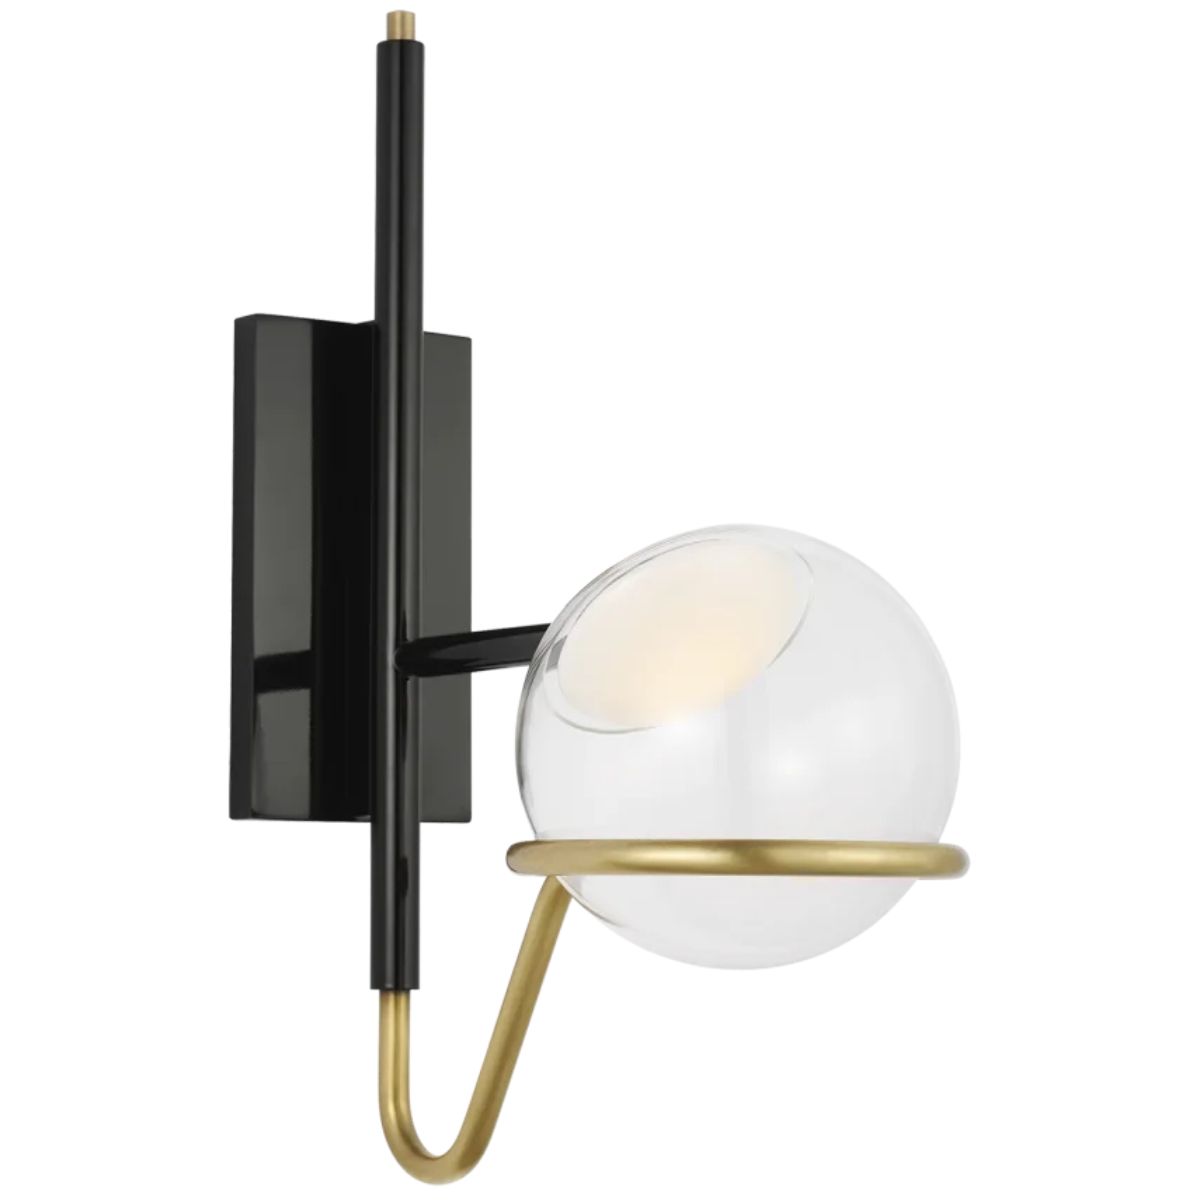 Crosby 18 in. LED Wall Sconce 277V Black & Natural Brass finish